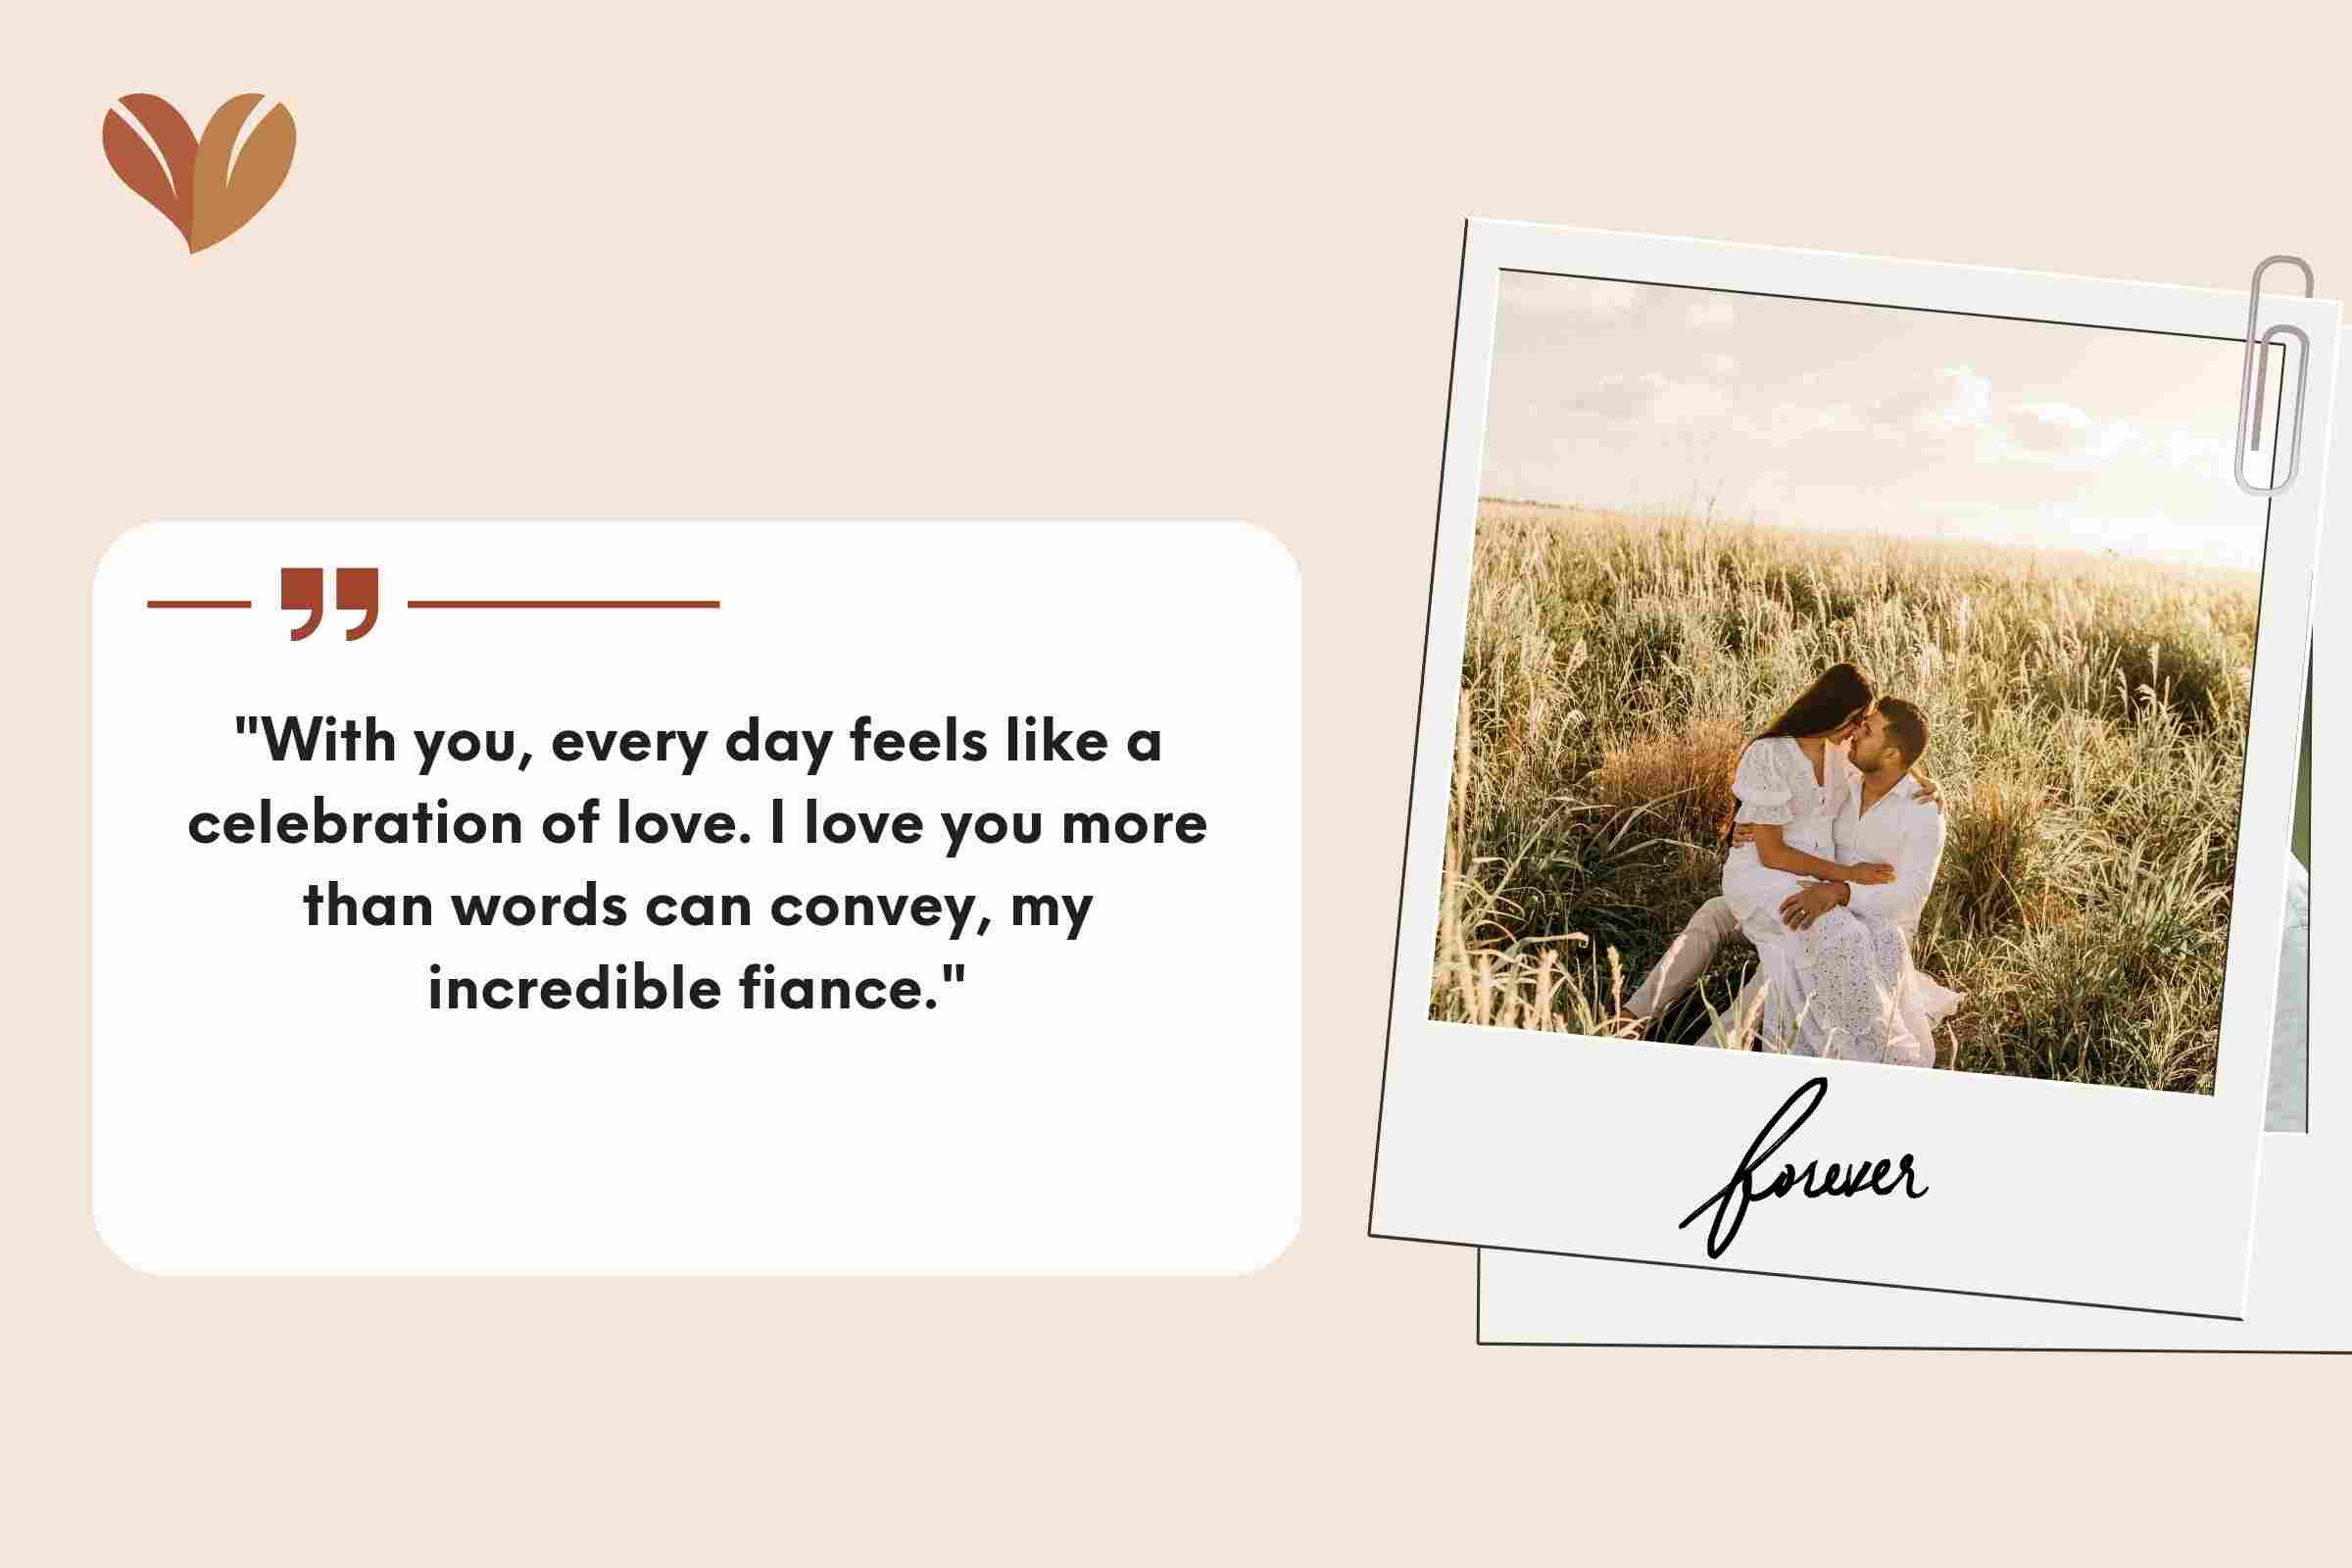 "With you, every day feels like a celebration of love. I love you more than words can convey, my incredible fiance."